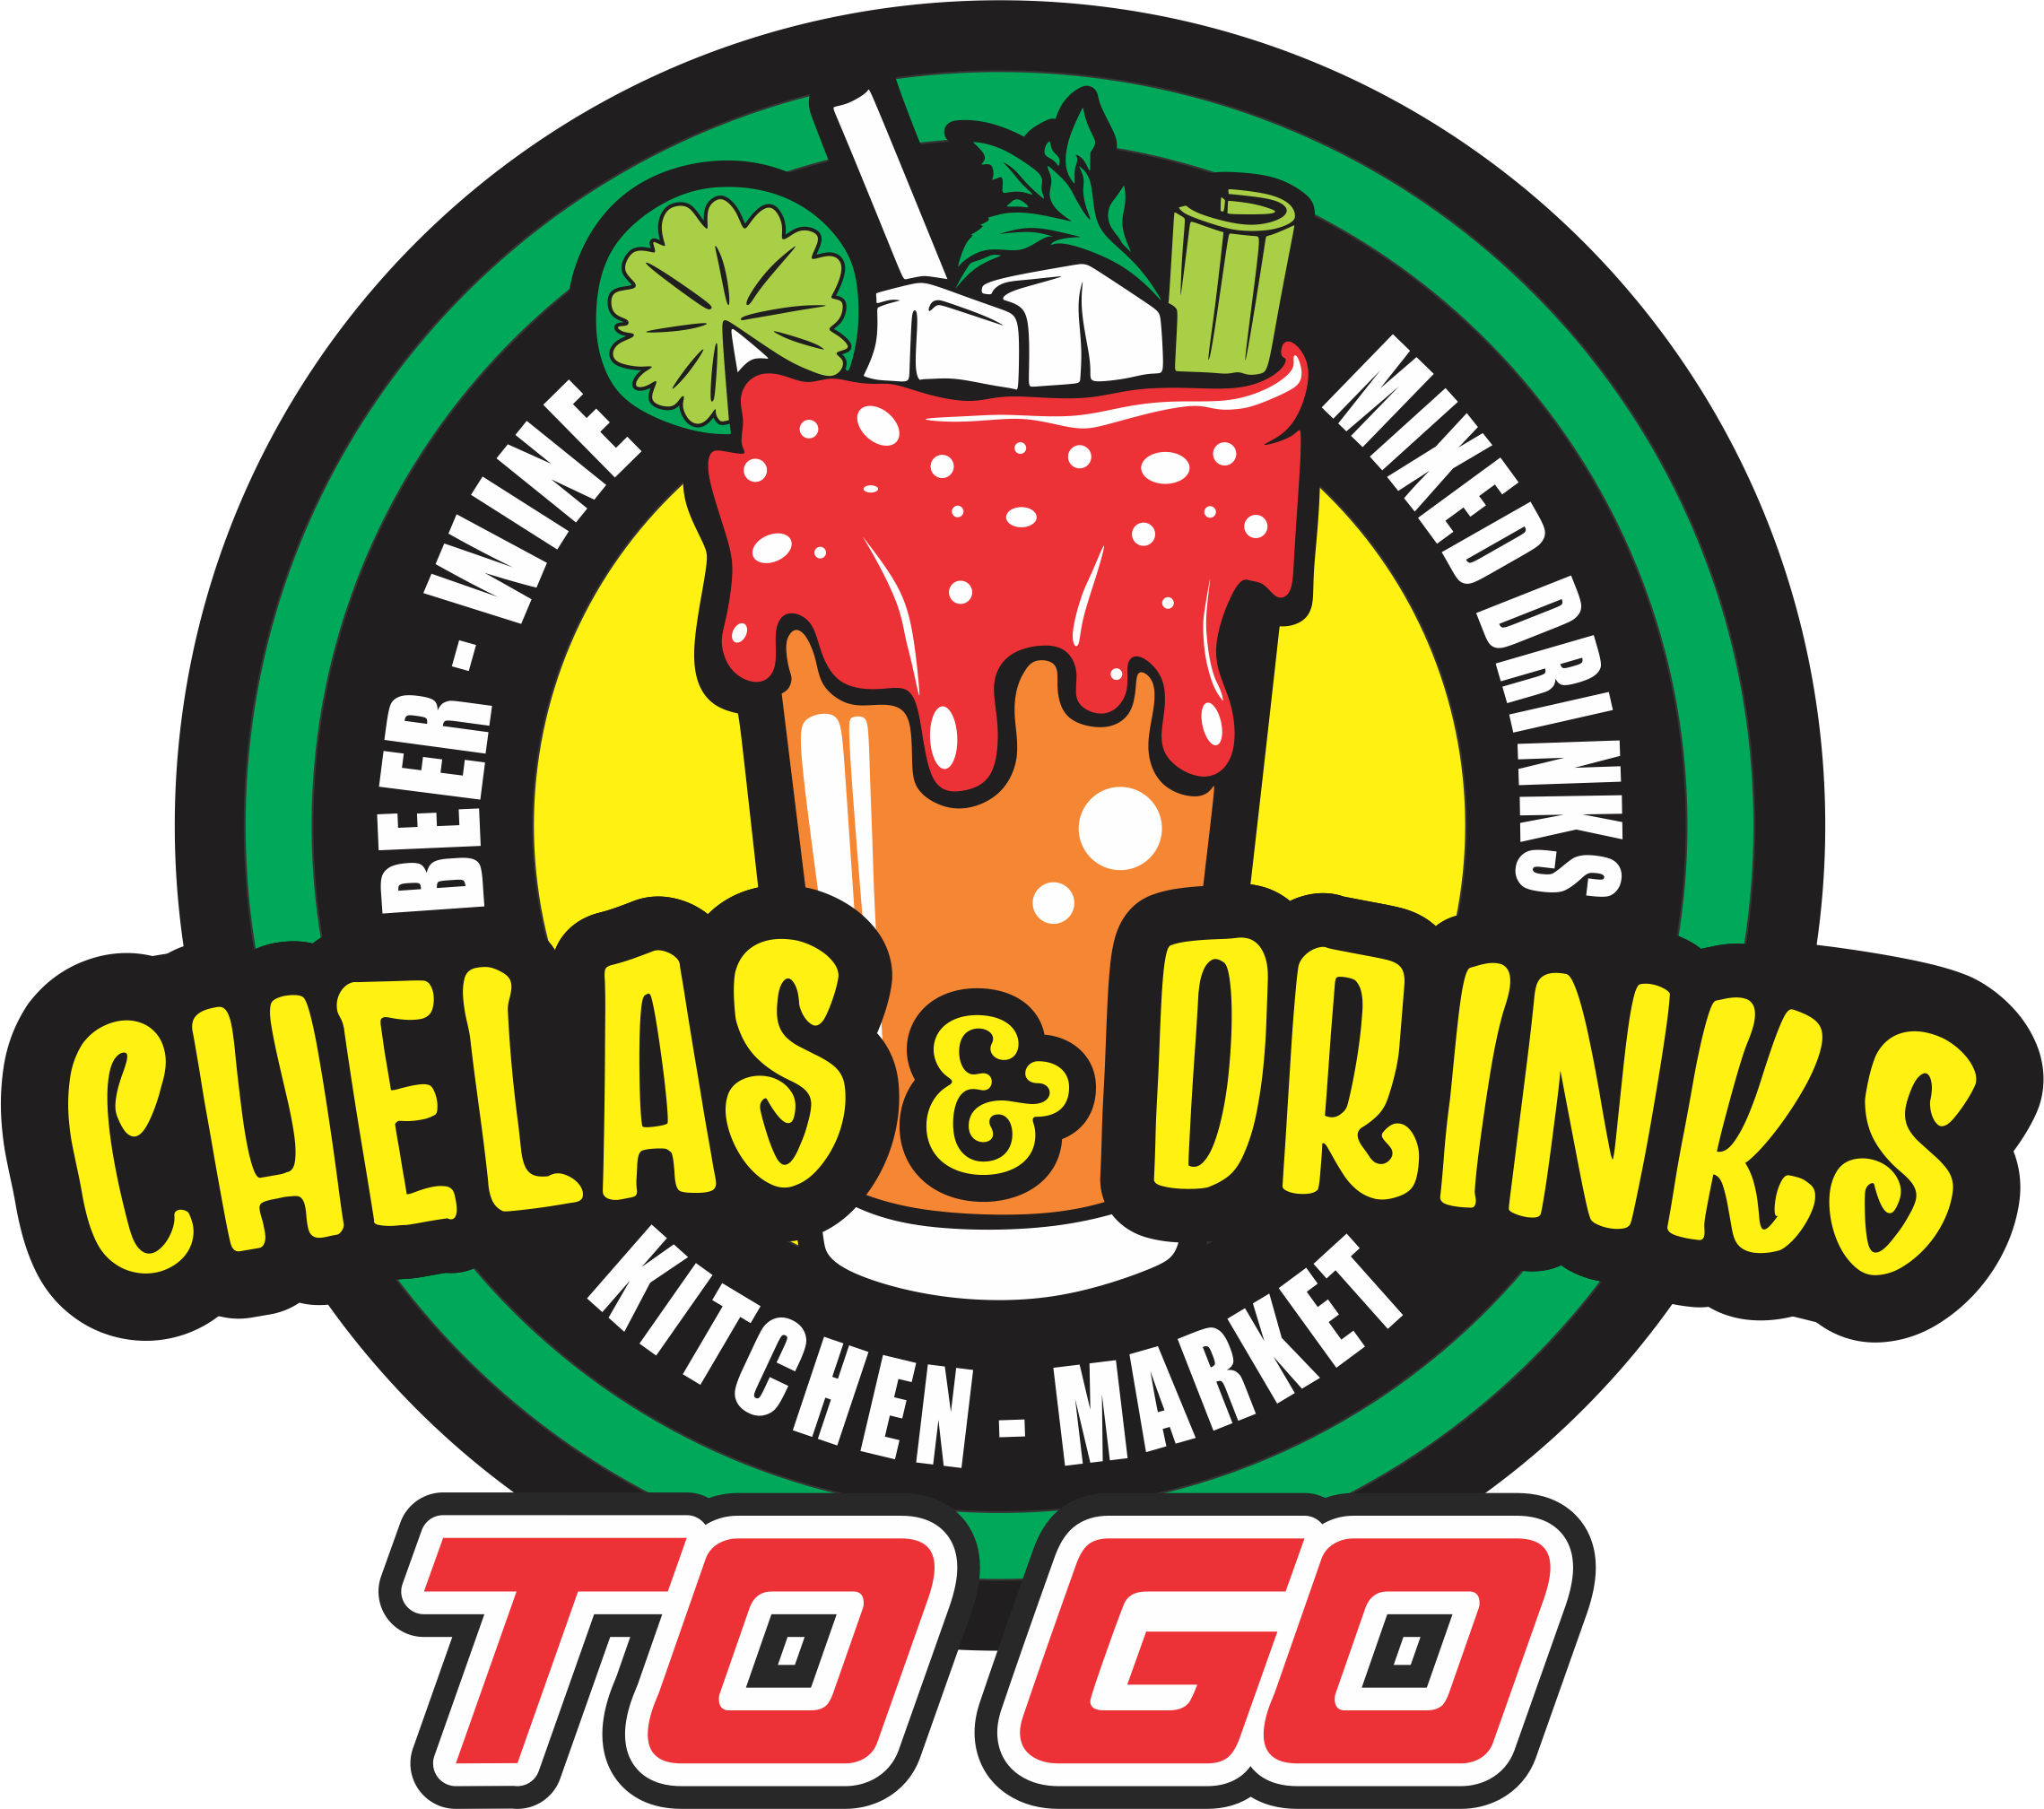 Chelas and Drinks to Go